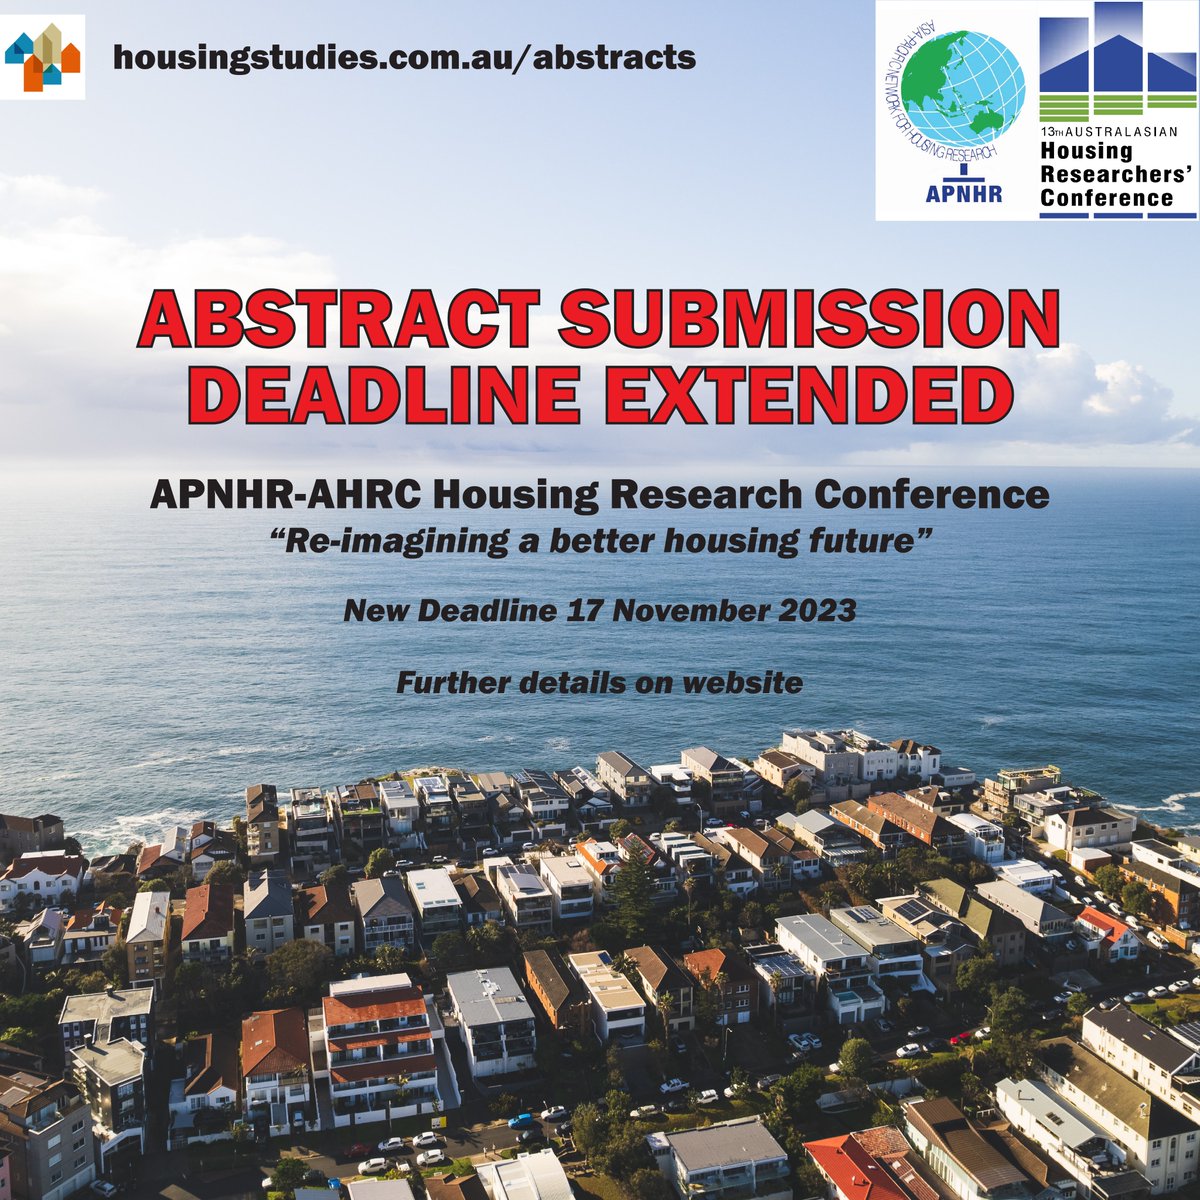 📢 Abstract Submission Deadline Extended to 17 Nov! 
#Housing #Conference

Joint AHRC-APNHR Conference
'Re-imagining a better housing future'
Adelaide, 21-23 Feb 2024

Details > bit.ly/ahsa-abstract-…

#aushousingstudies #aushousingconference #housingresearch #auspol #research